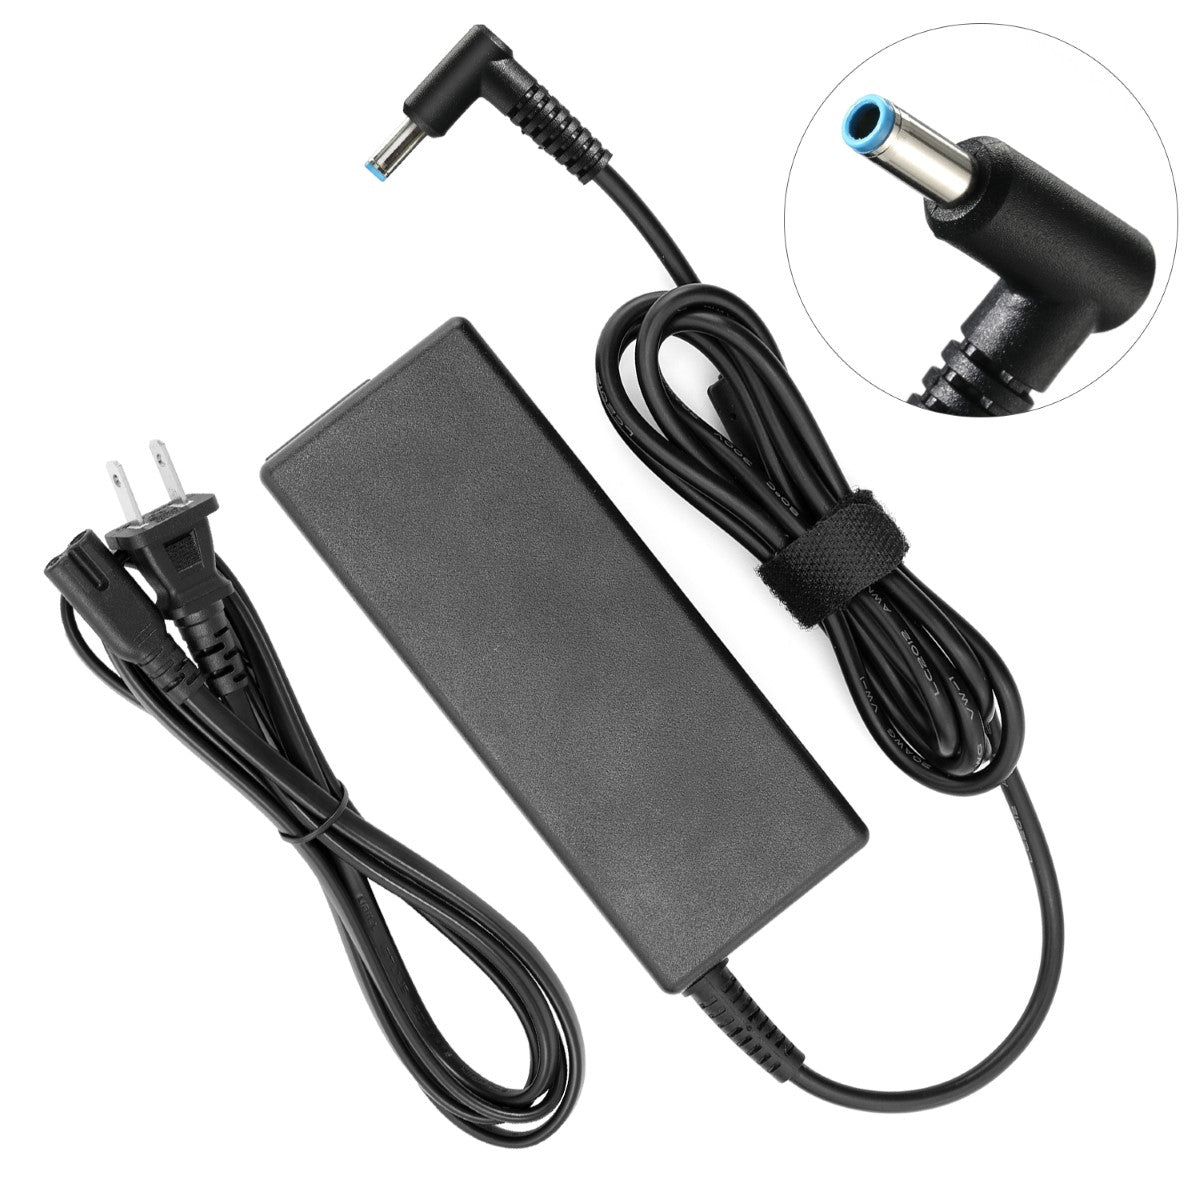 AC Adapter Charger for HP Envy TouchSmart m7-j010dx Notebook.